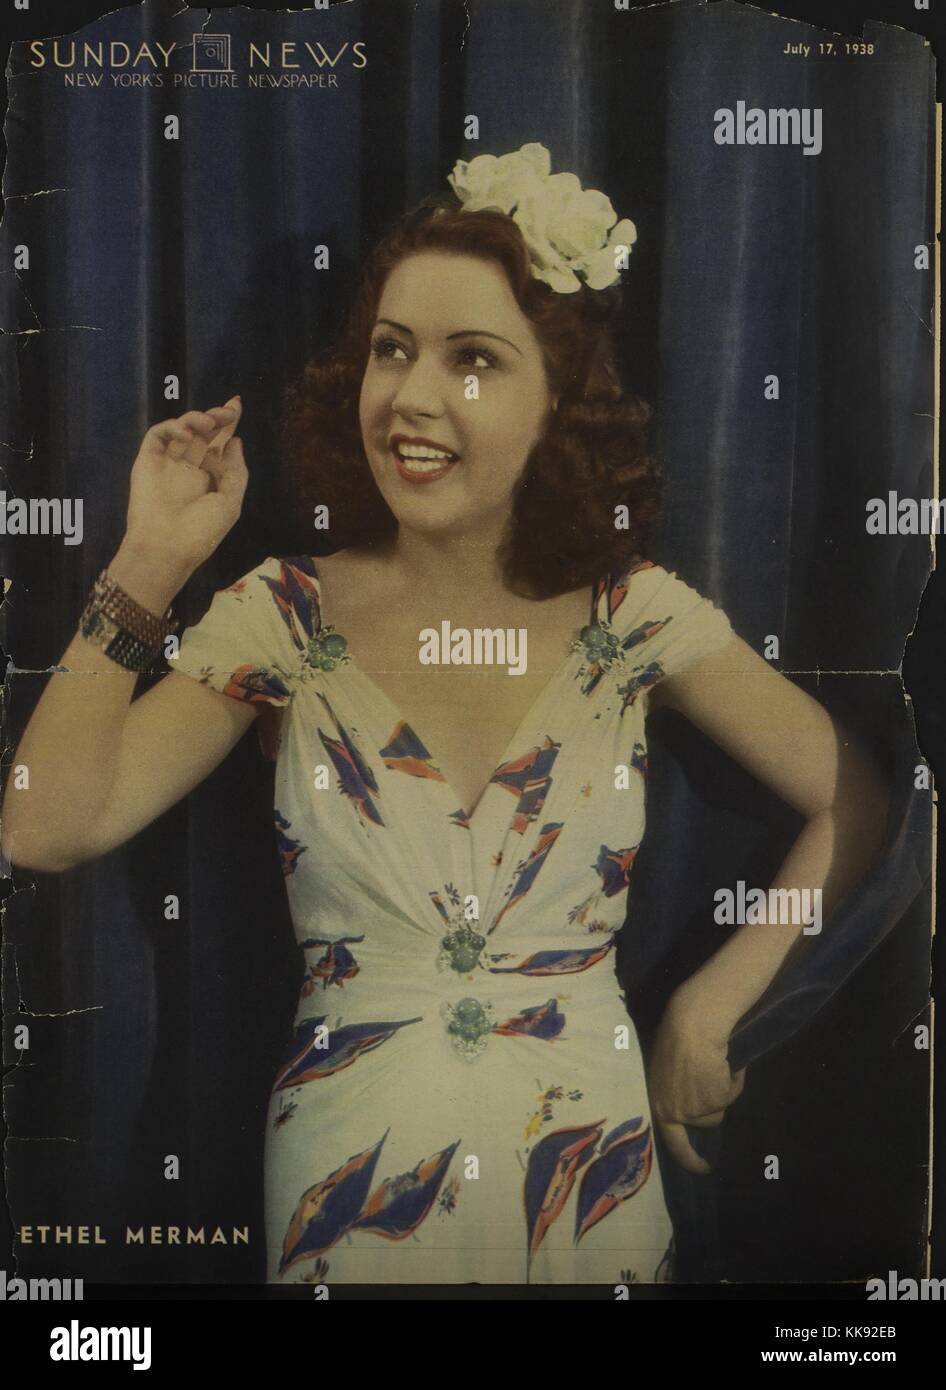 Ethel Merman, American actress and singer, known primarily for her voice and roles in musical theater, wearing a white dress with purple floral motif, on the cover of the New York Sunday News, 1938. From the New York Public Library. Stock Photo